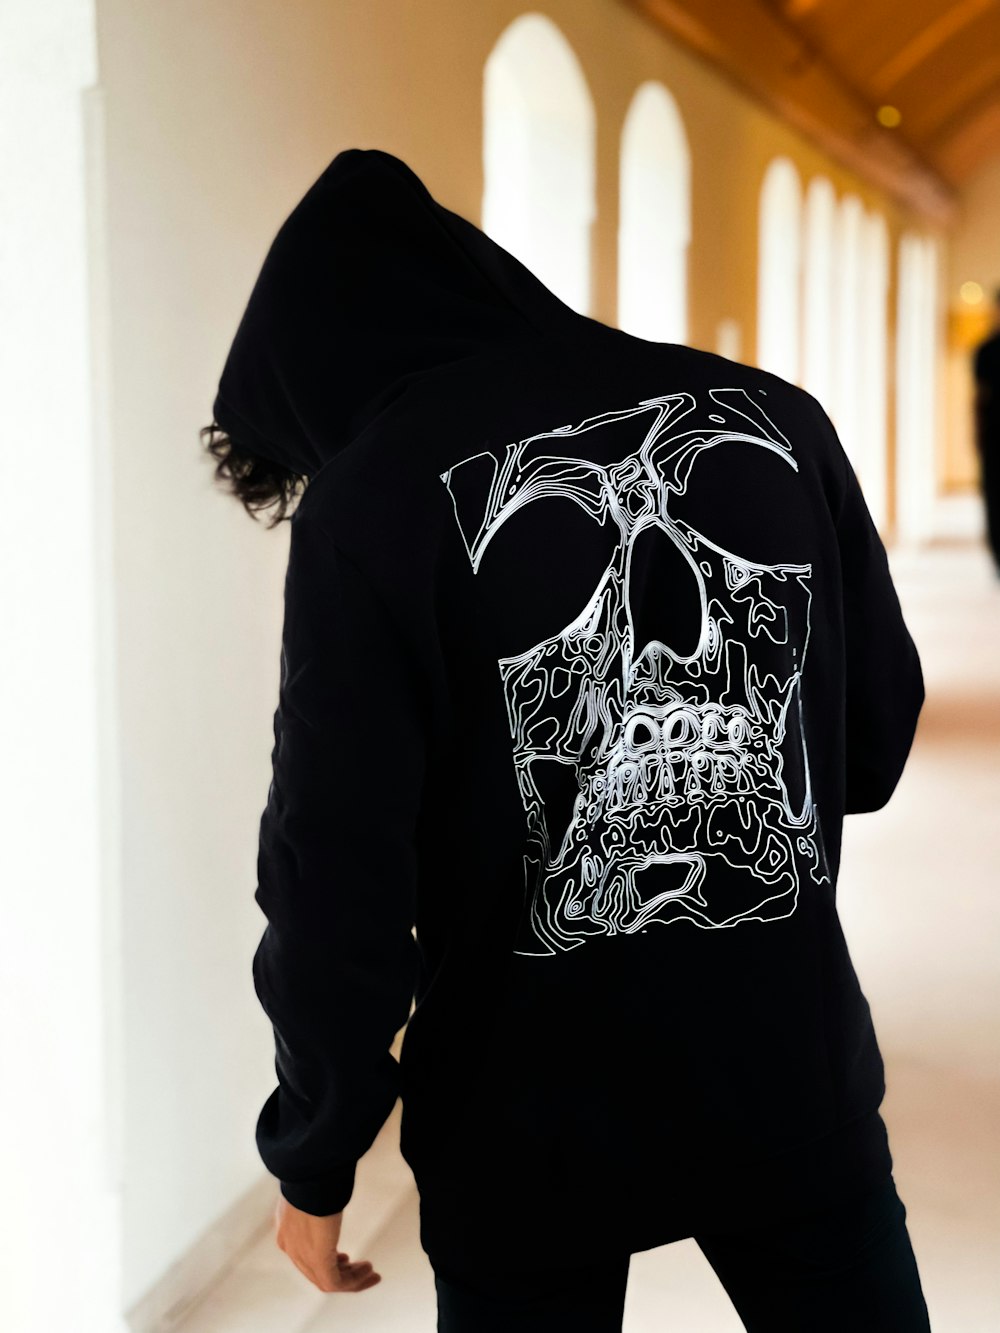 a person wearing a black hoodie with a white skull on it